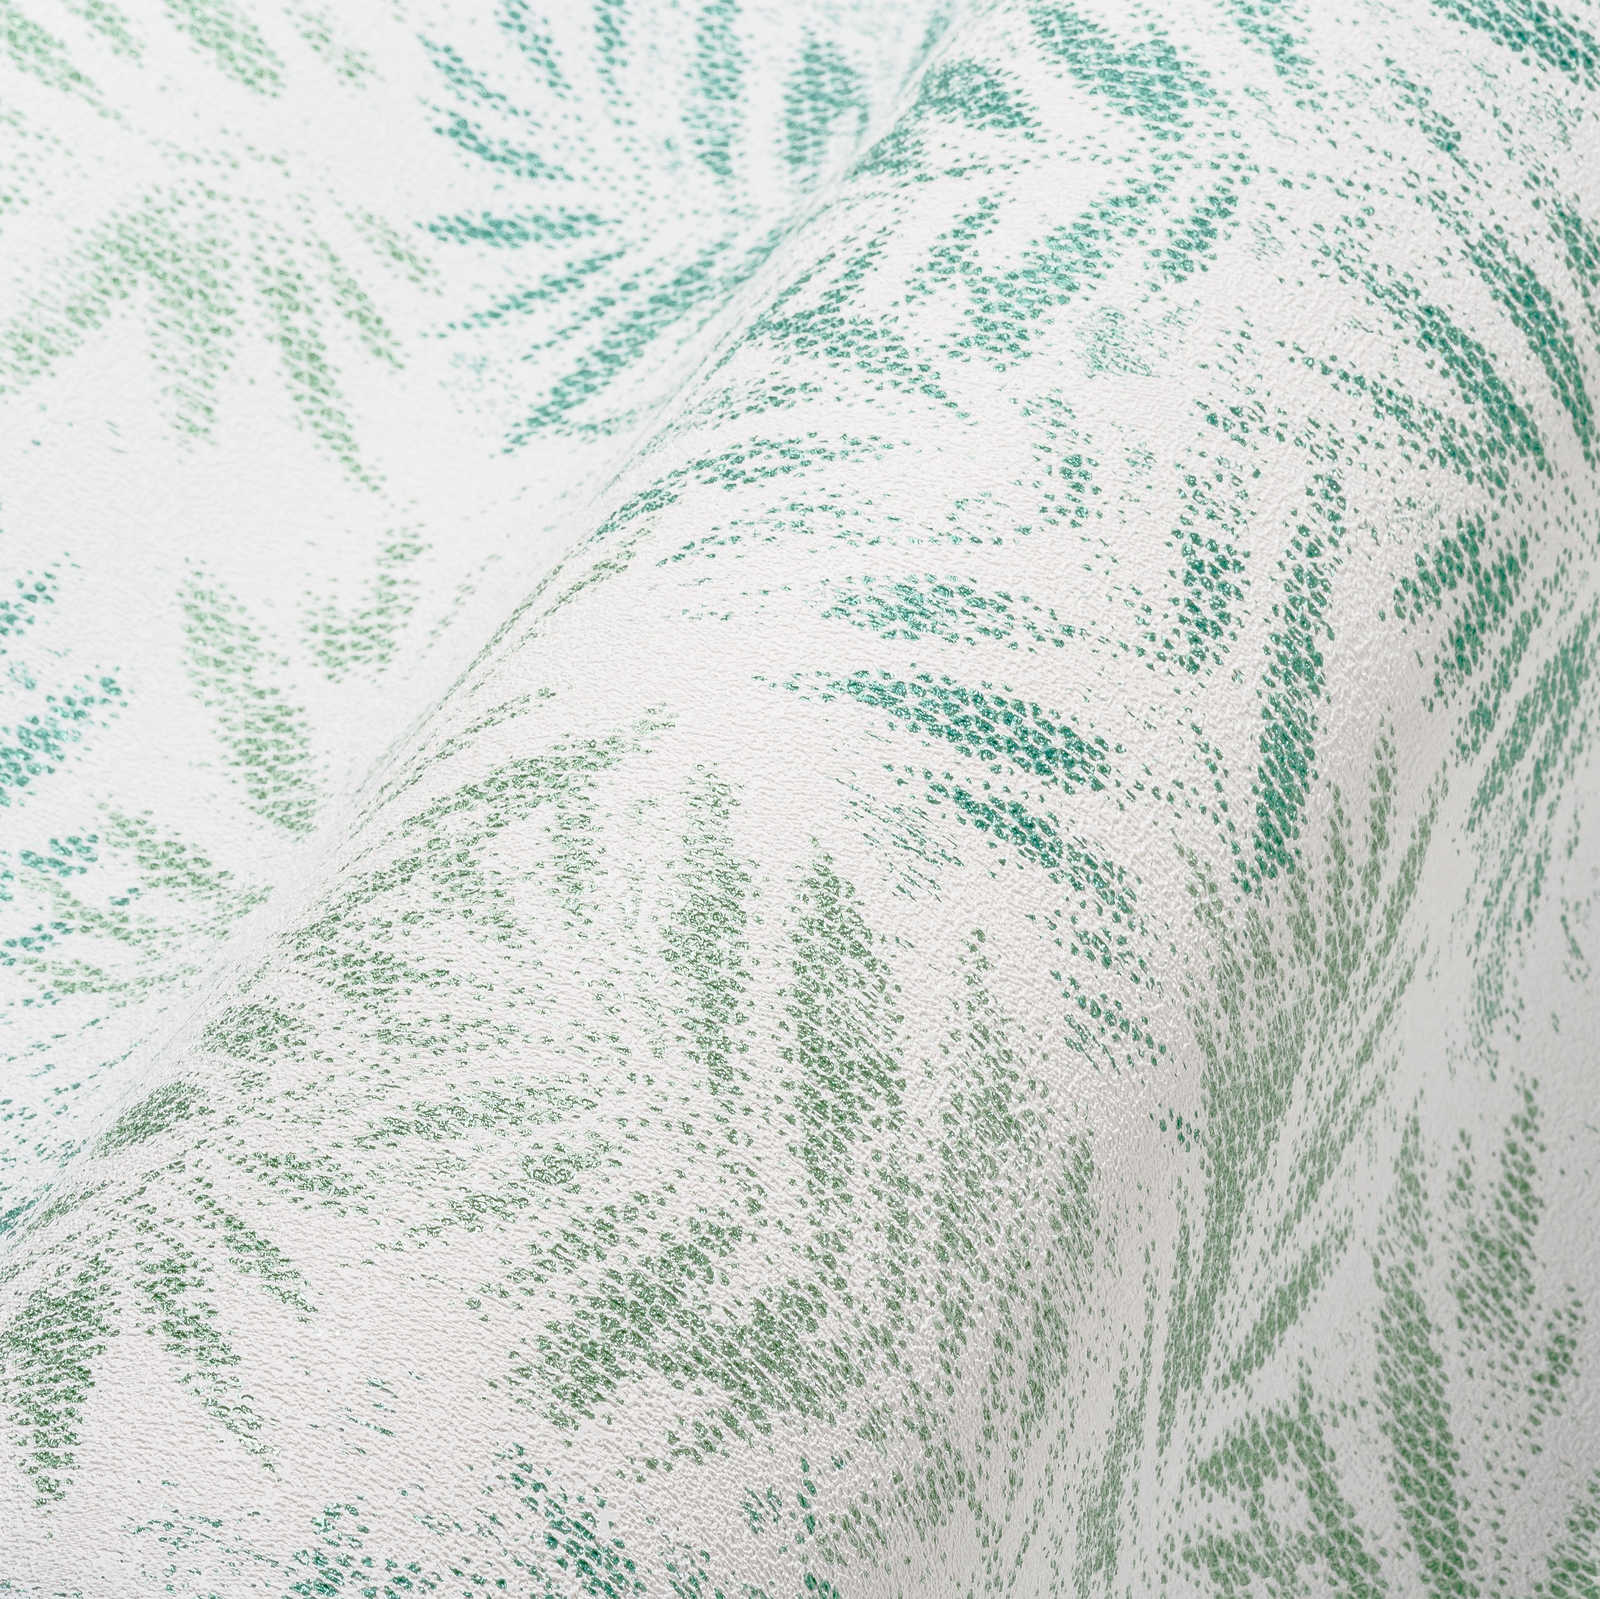             Leaf pattern wallpaper with glossy structure - white, green
        